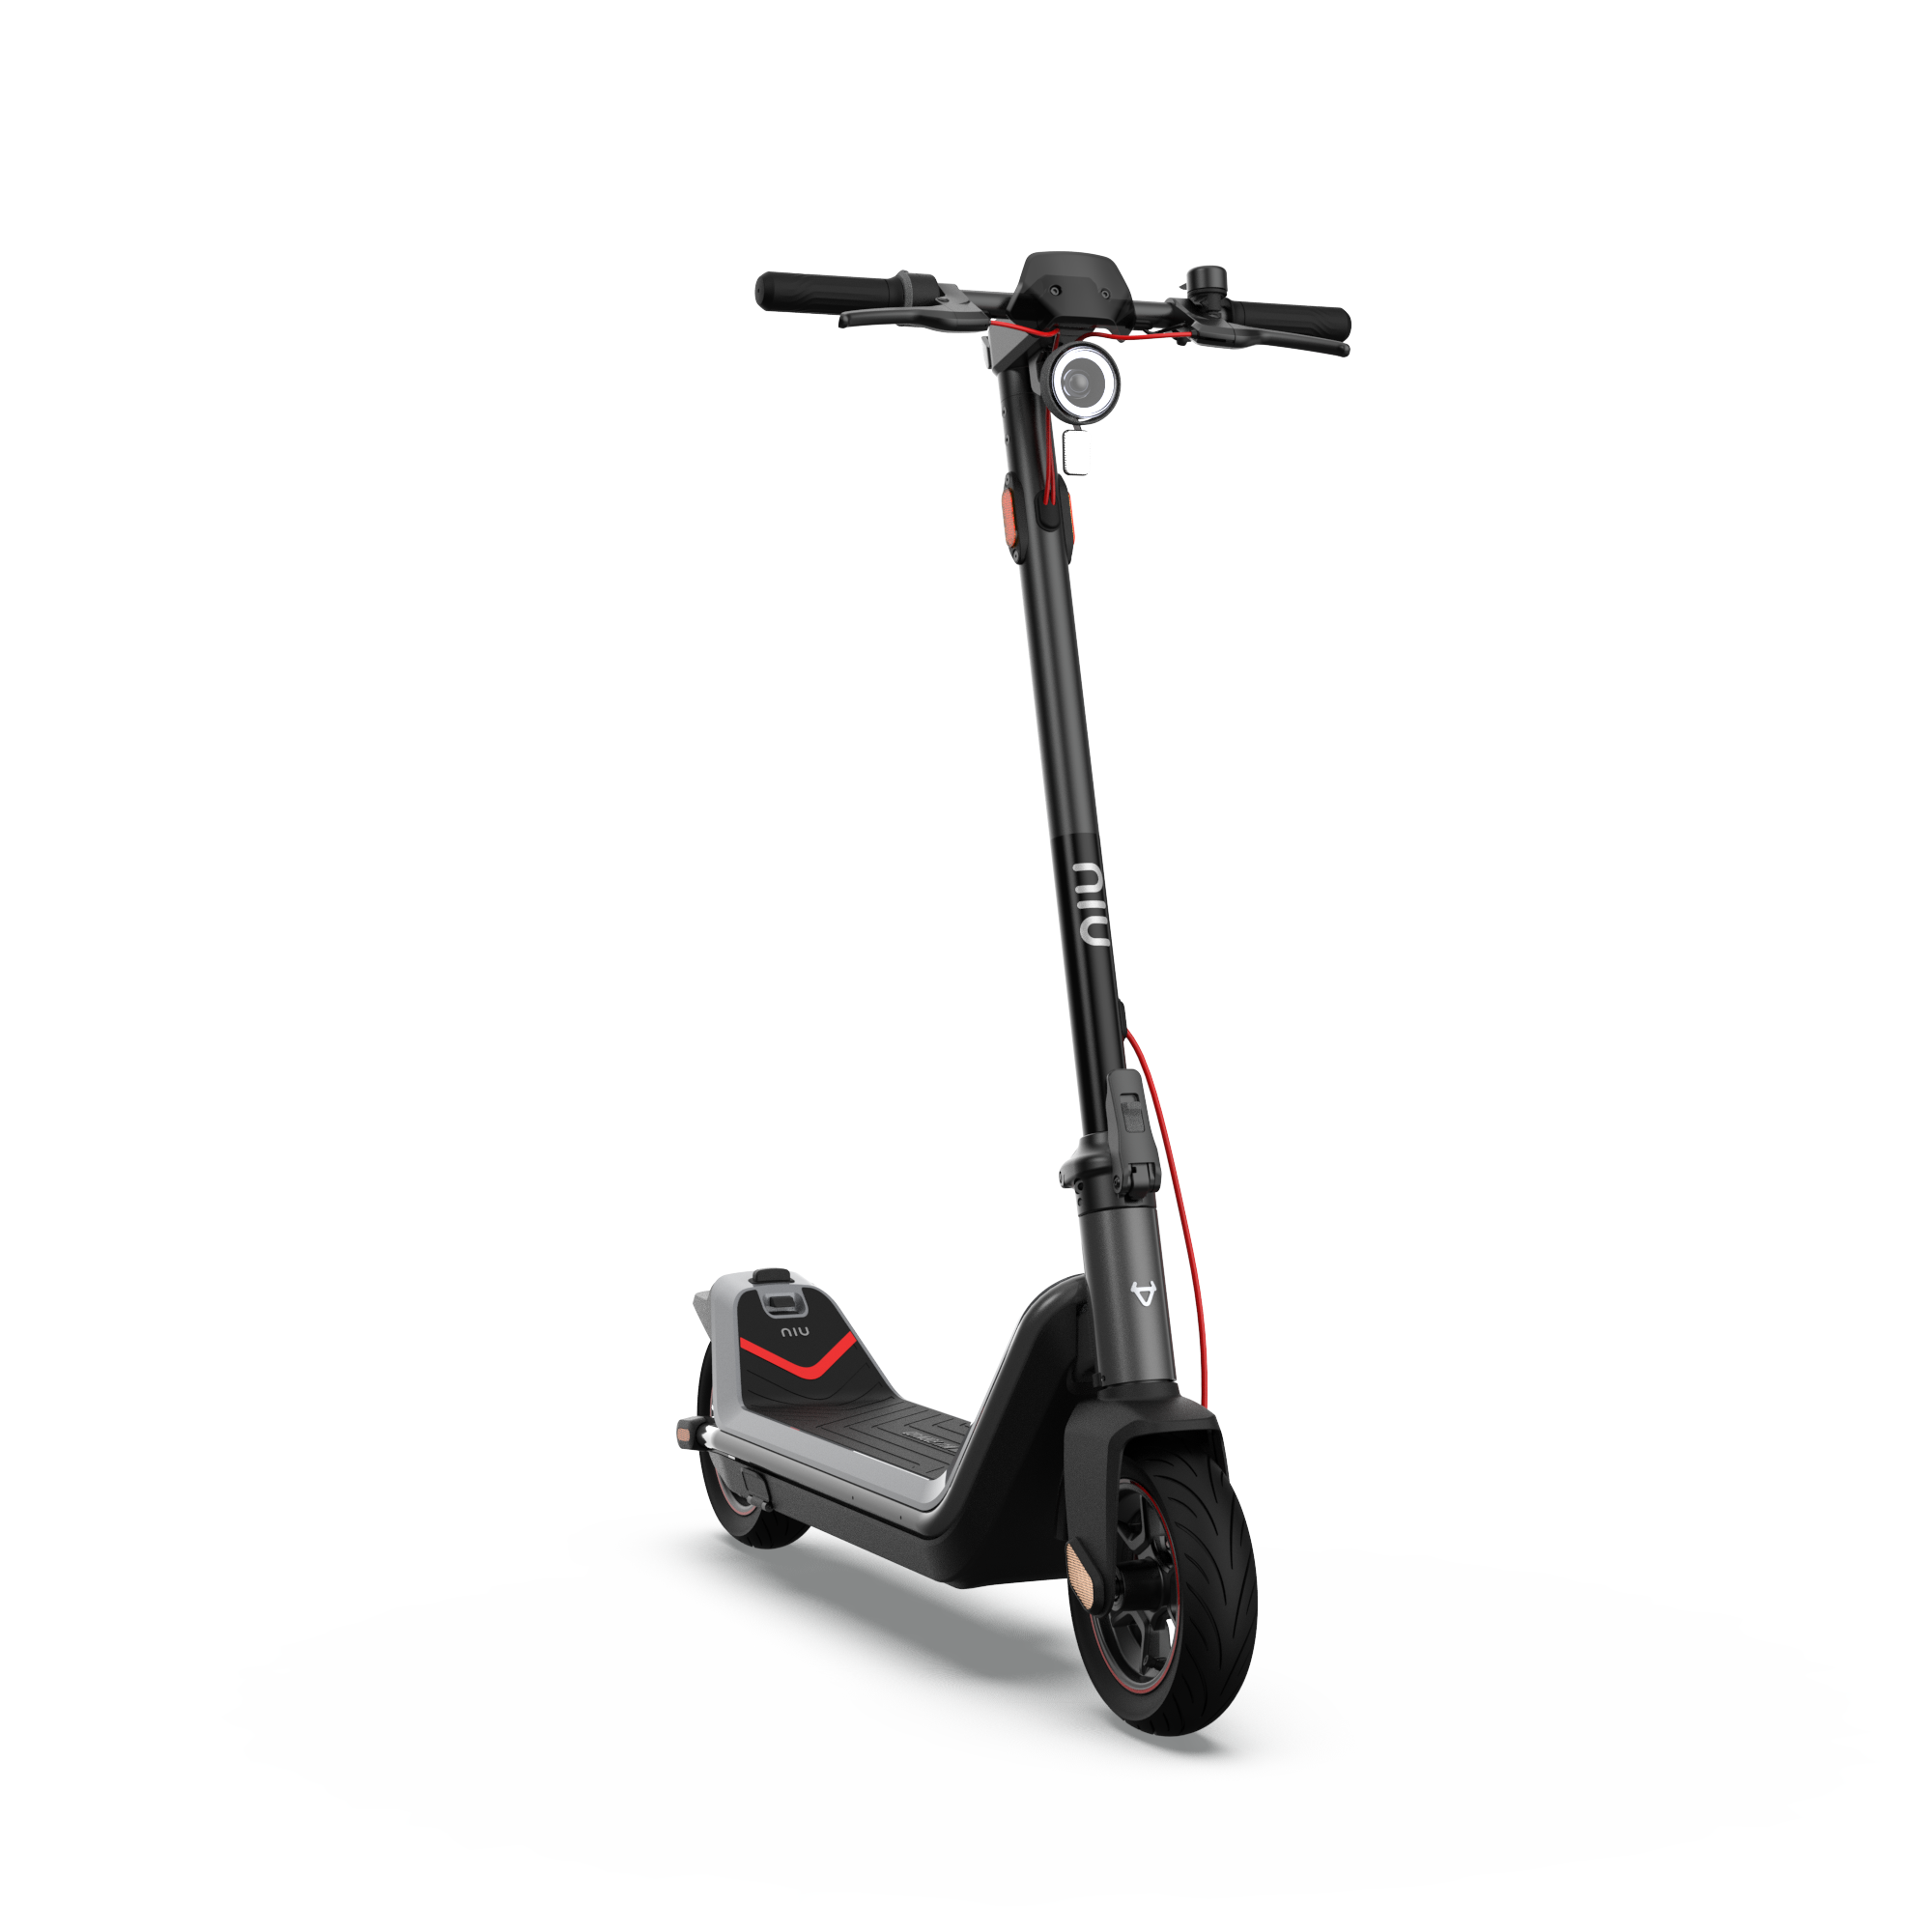  NIU KQi3 Max Electric Scooter, Portable, Folding , 450W Power,  40 Miles Long Range, Max Speed 23.6MPH, 25% Hill Climbing, 265lbs Max Load,  Self-Healing Tires for Adults, UL Certified 